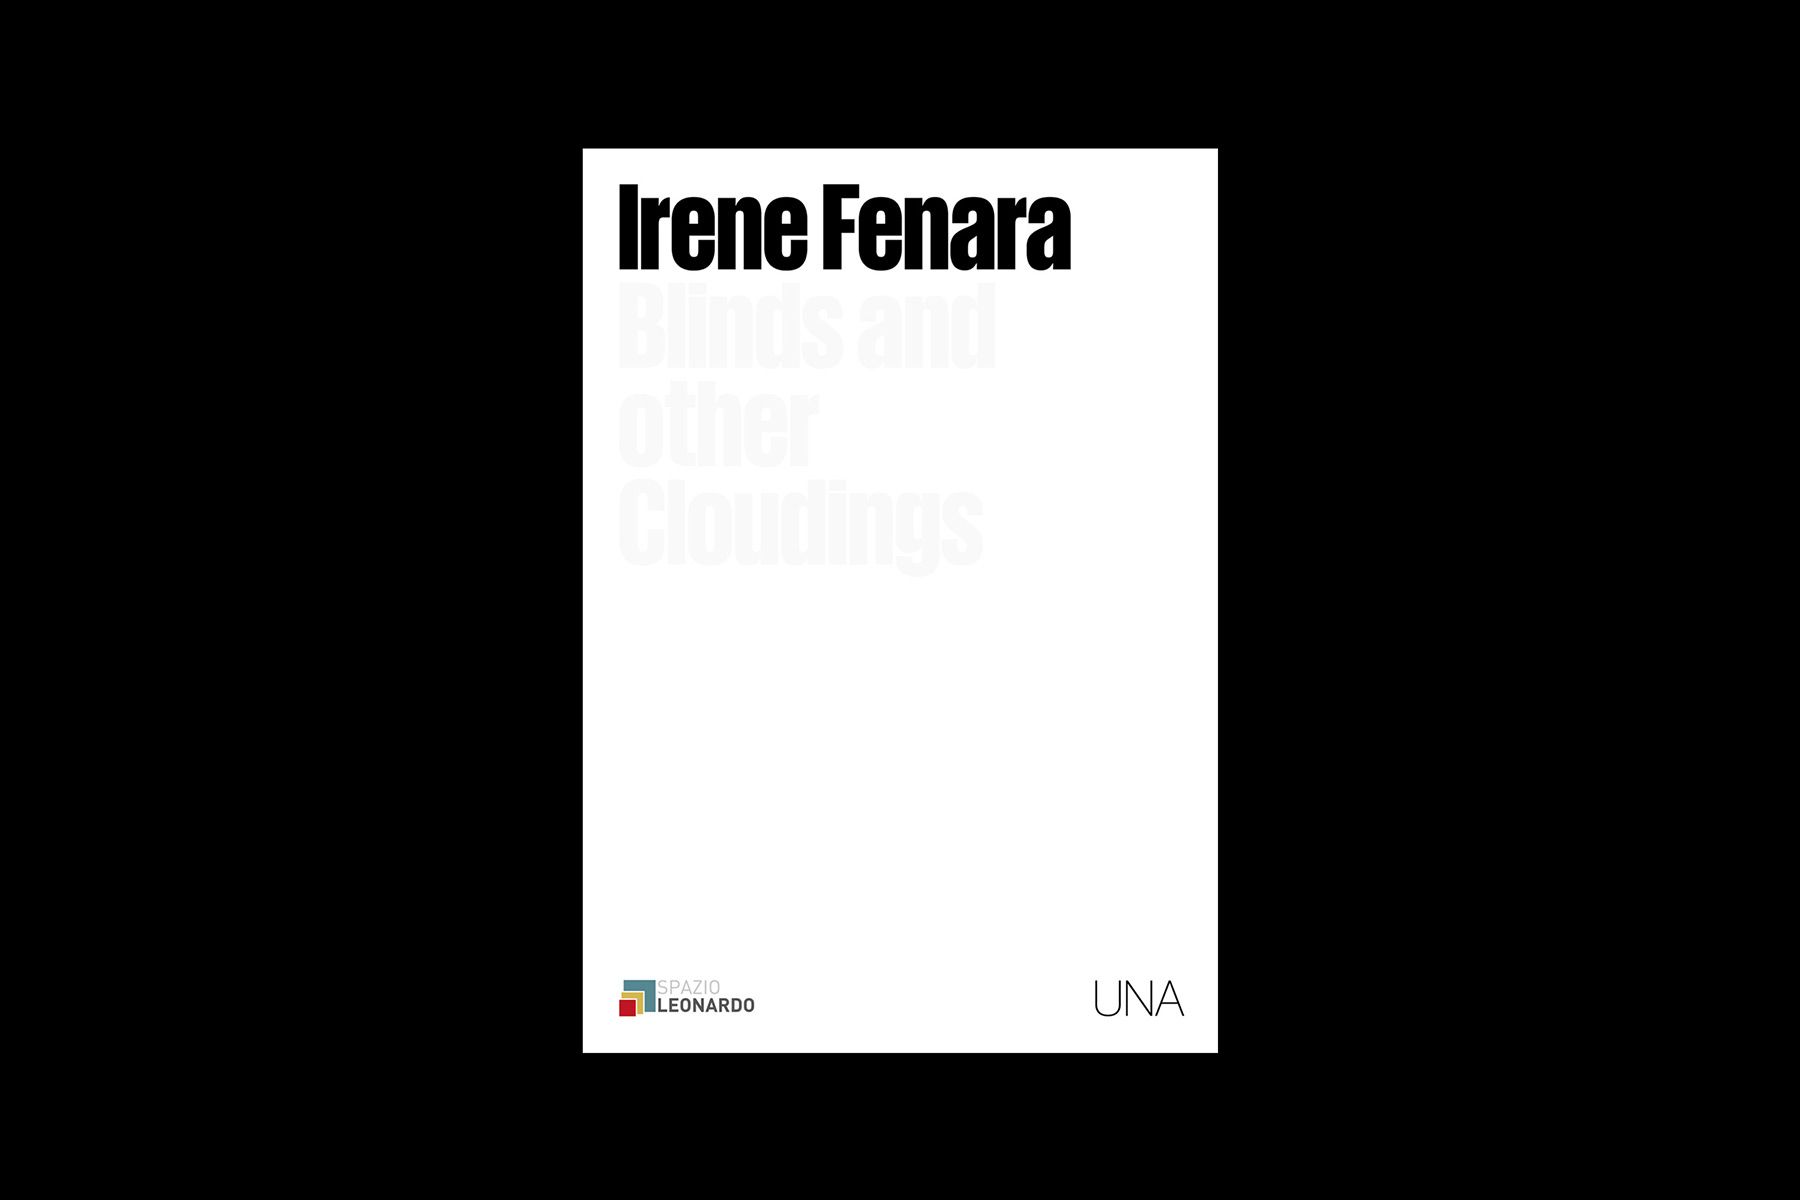 irene fenera blinds other cloudings